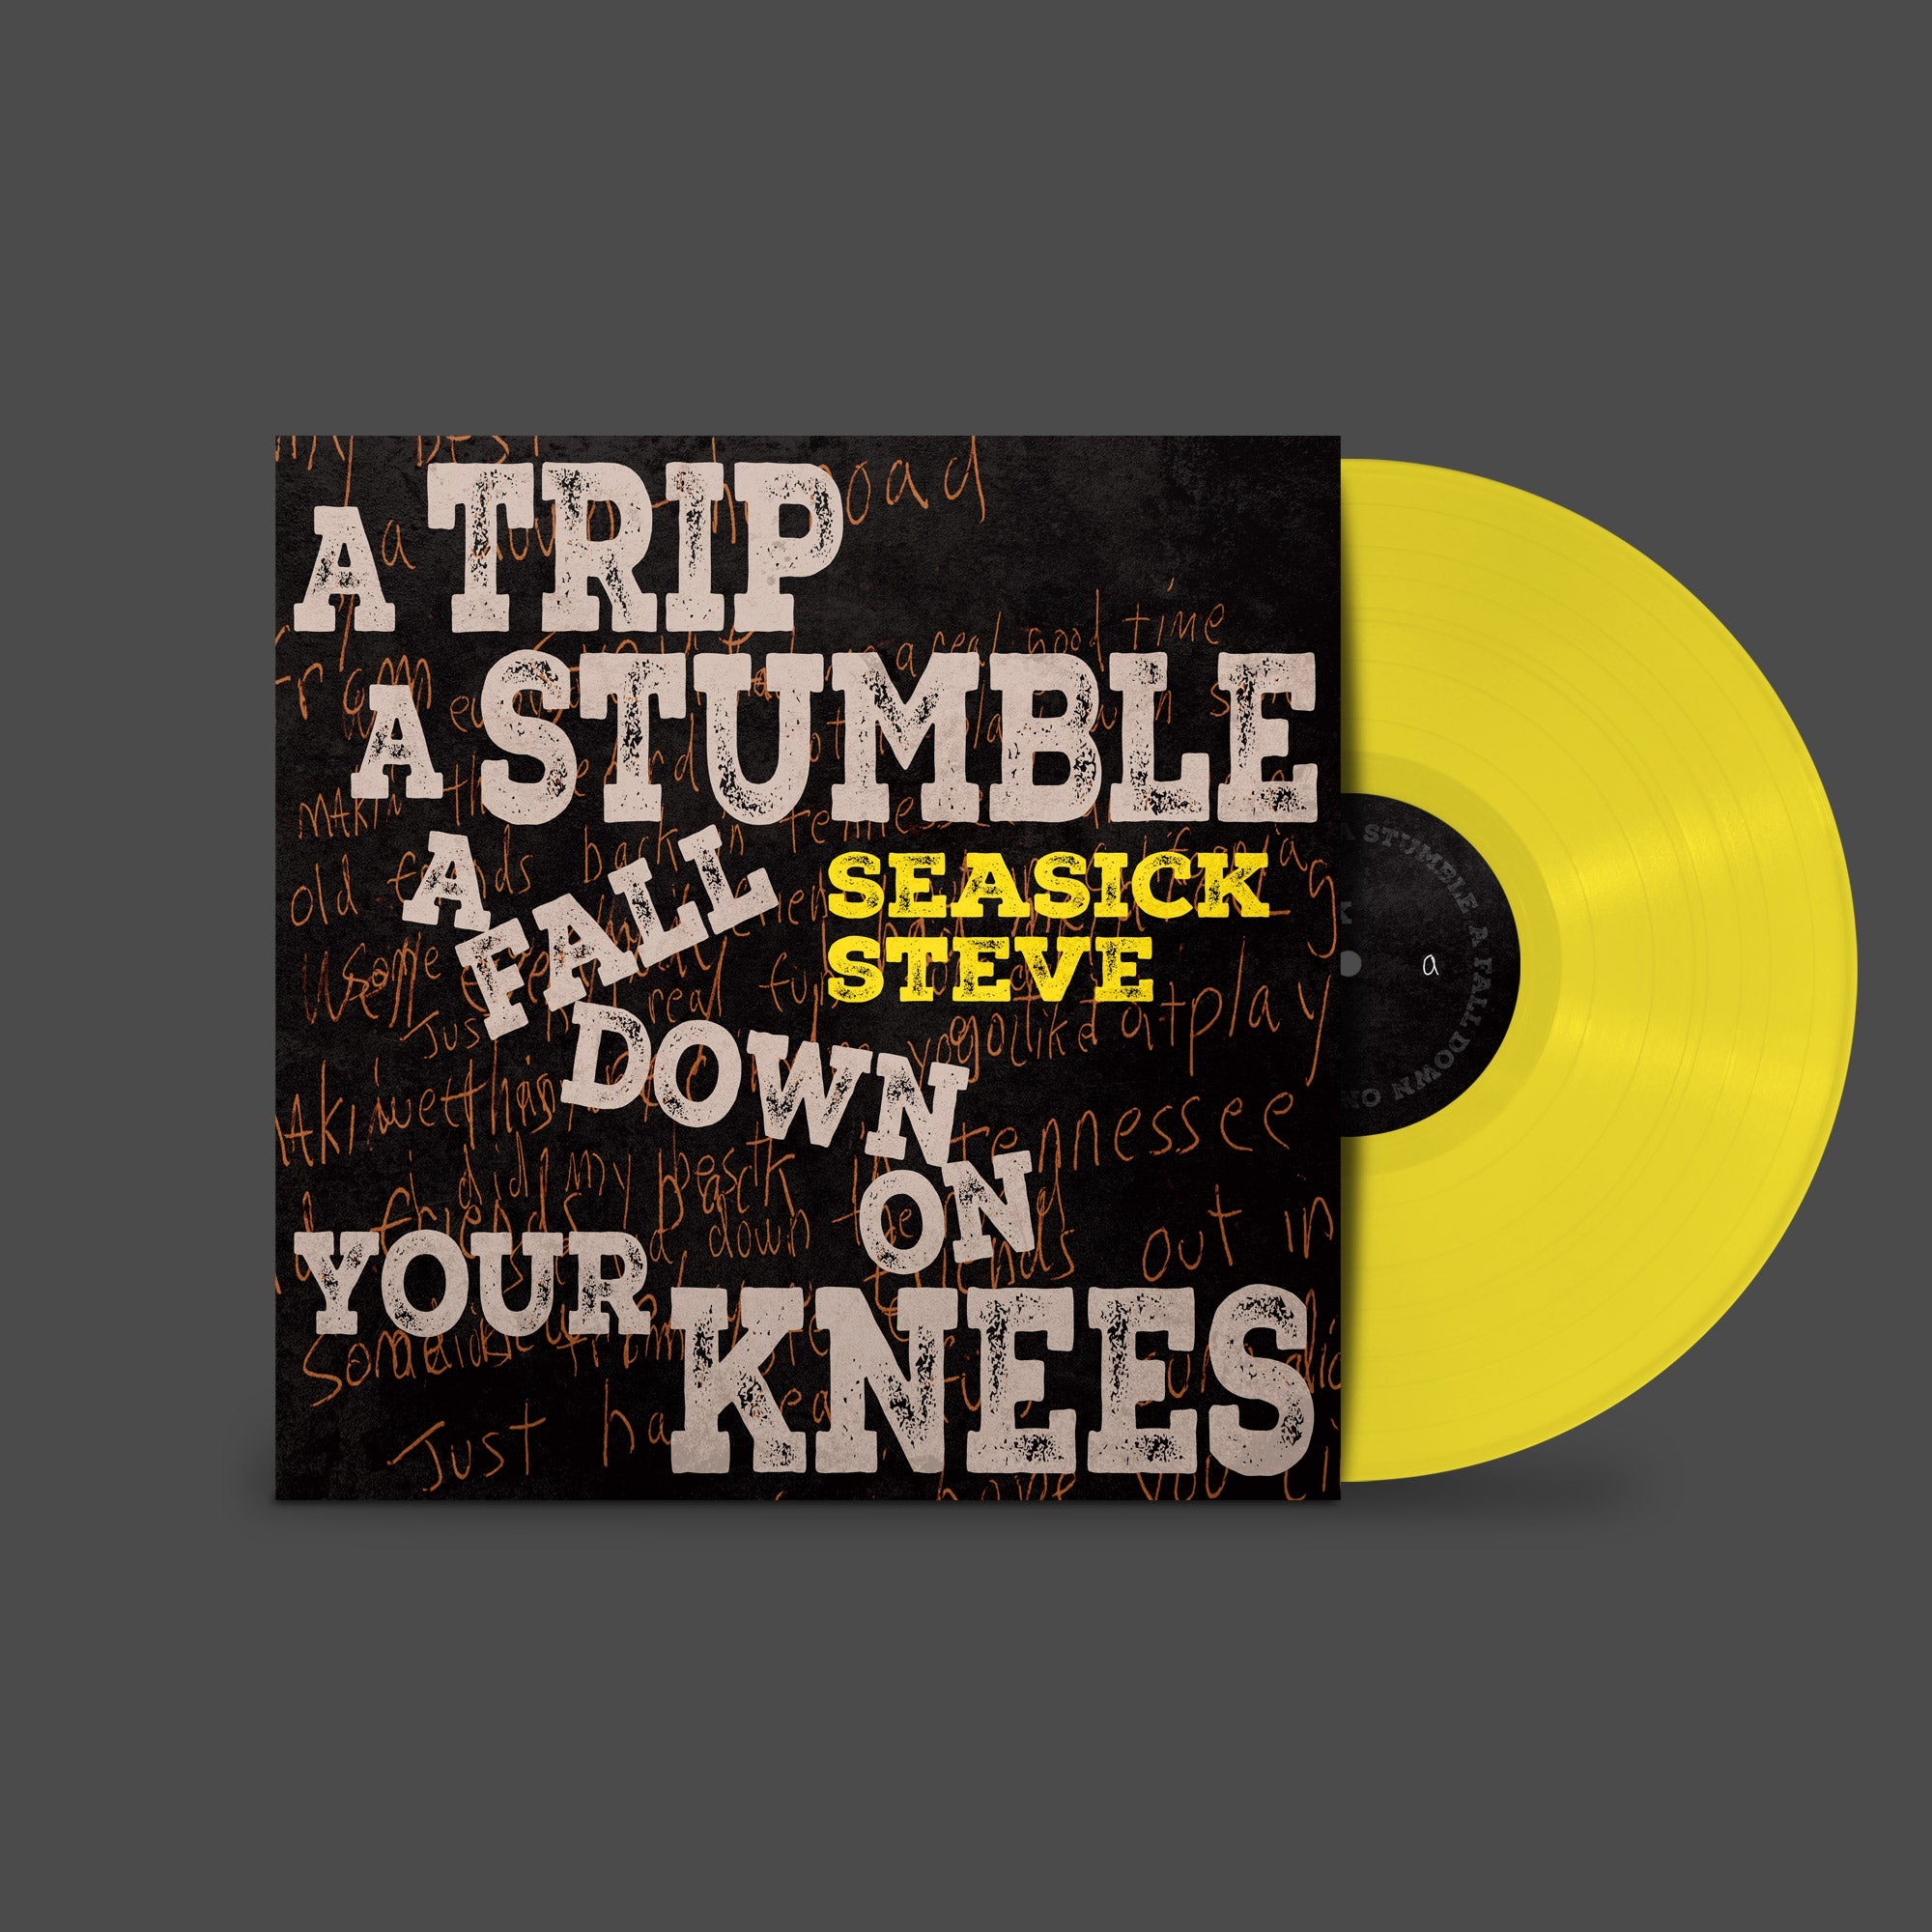 A Trip, A Stumble, A Fall Down On Your Knees: Limited Canary Yellow Vinyl LP + Signed Print